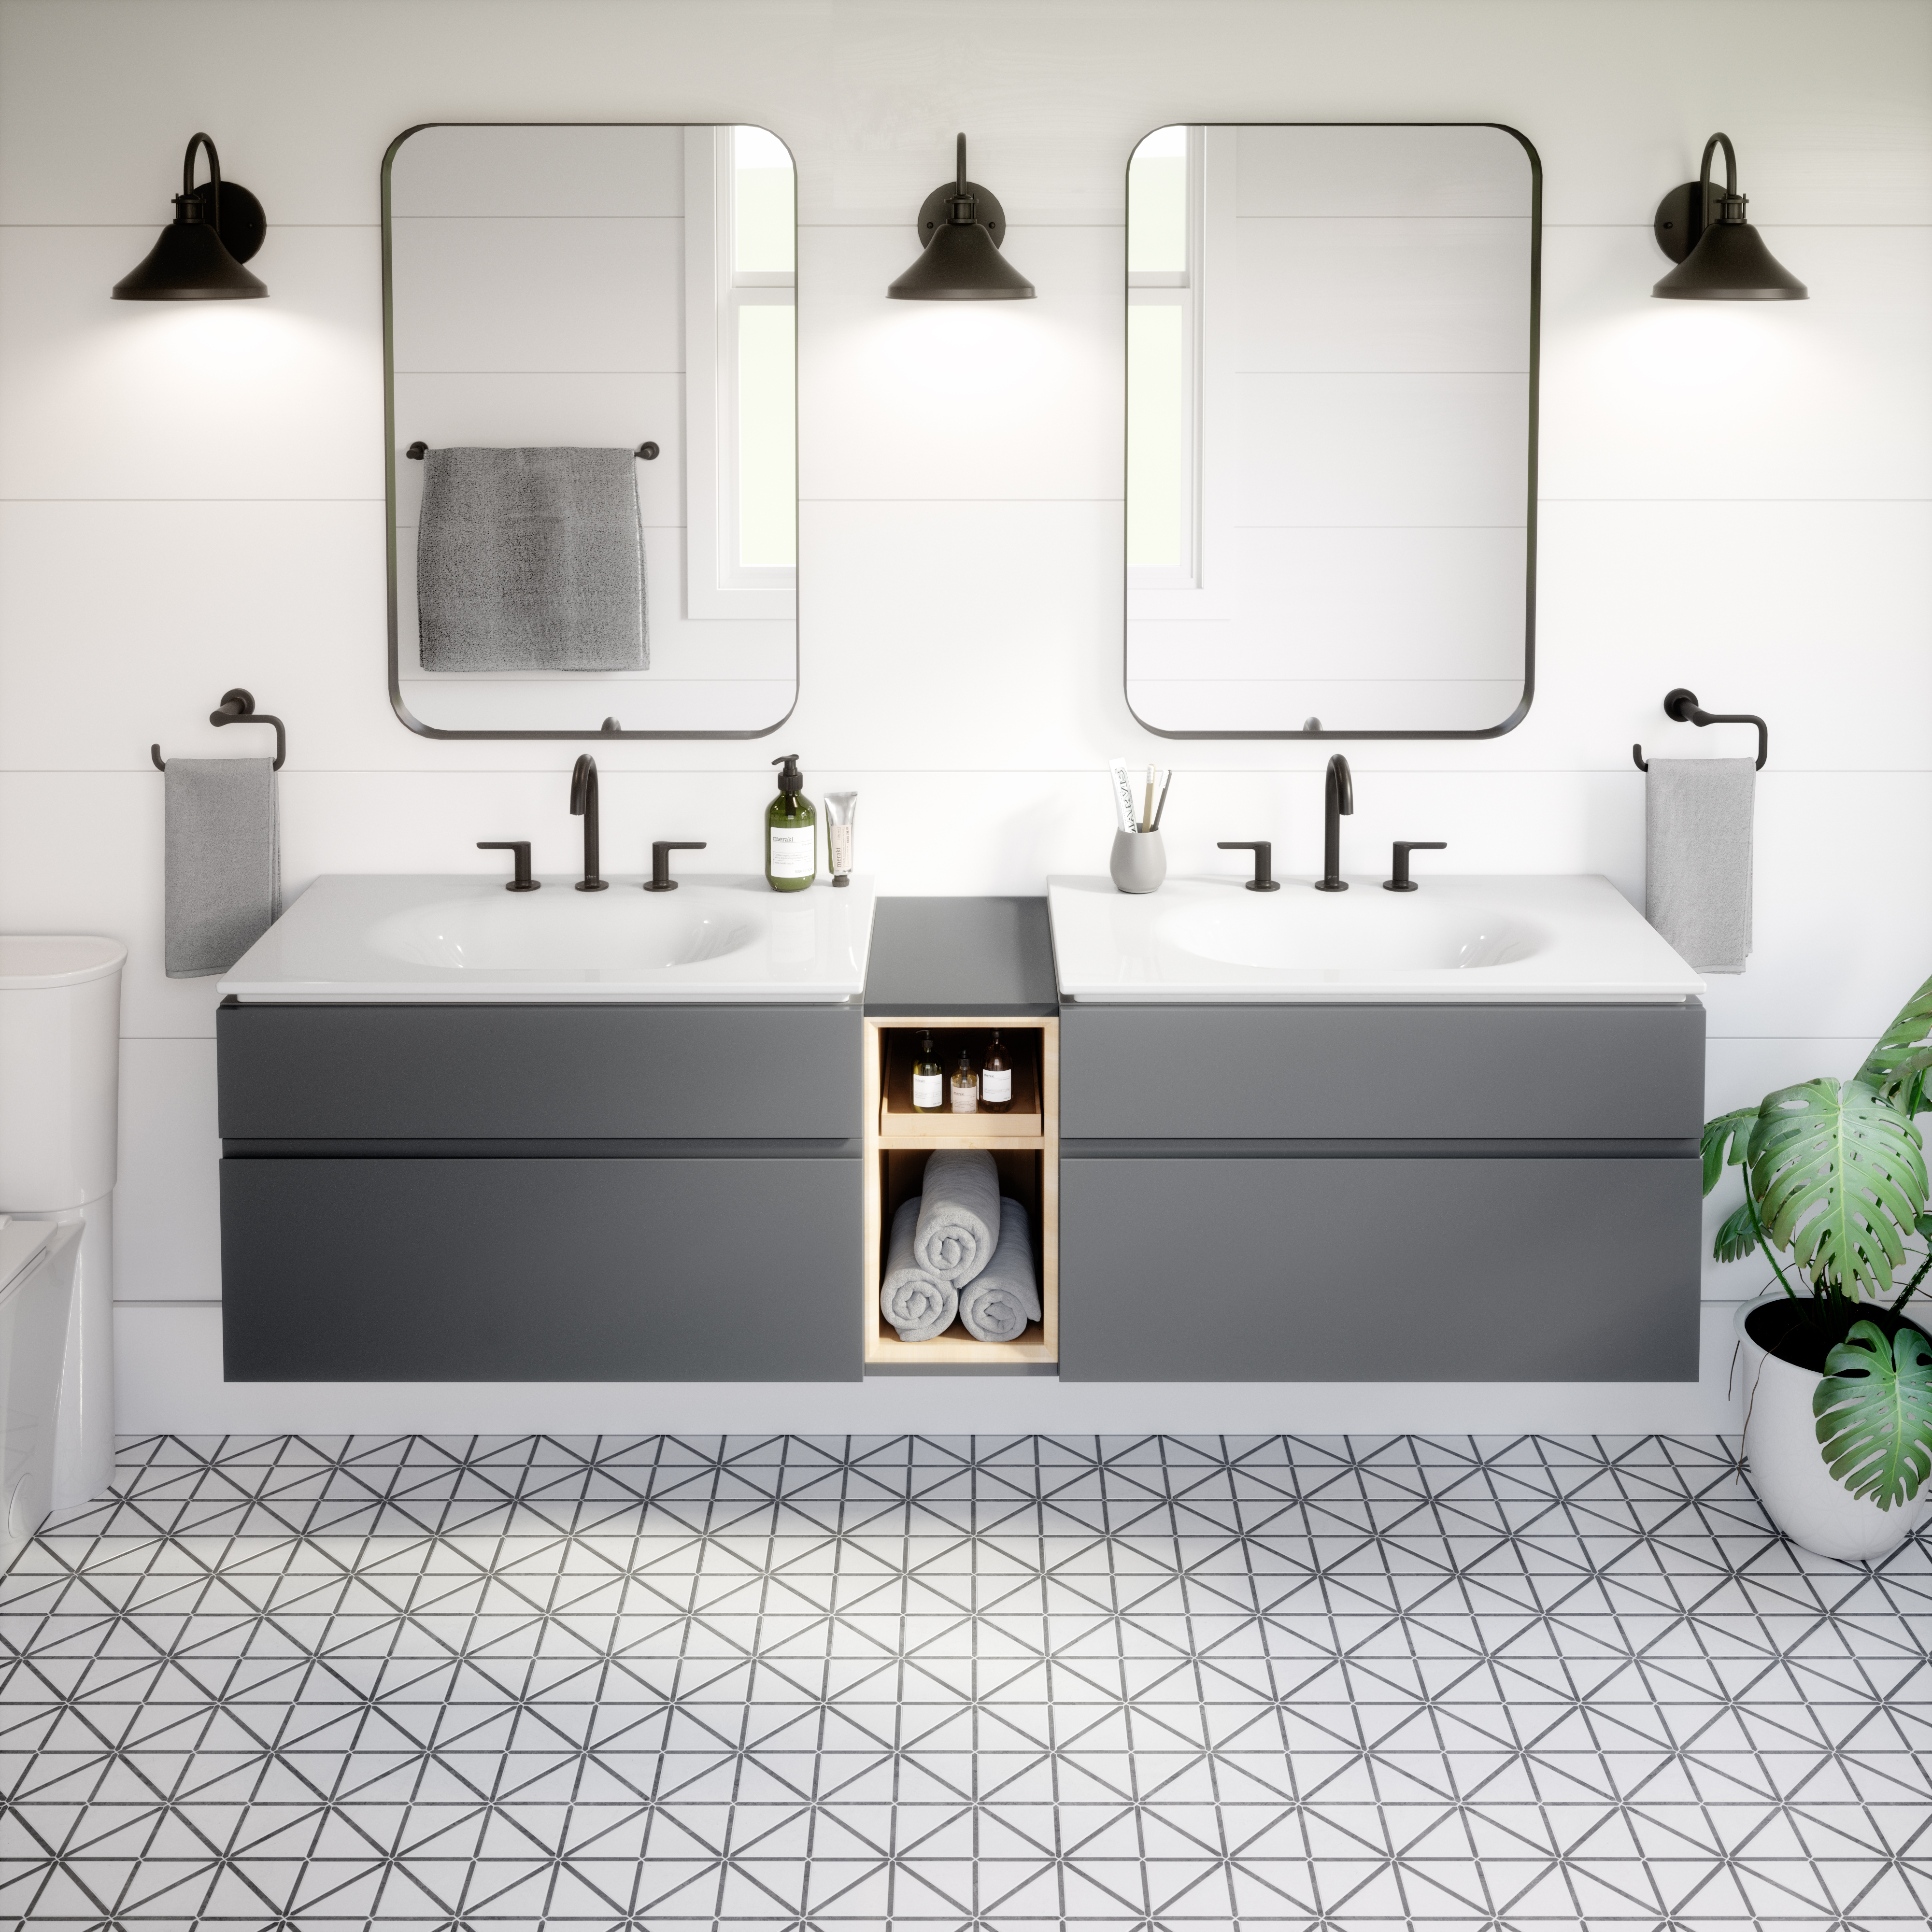 American Standard Expands Studio S Bath Collection | Residential